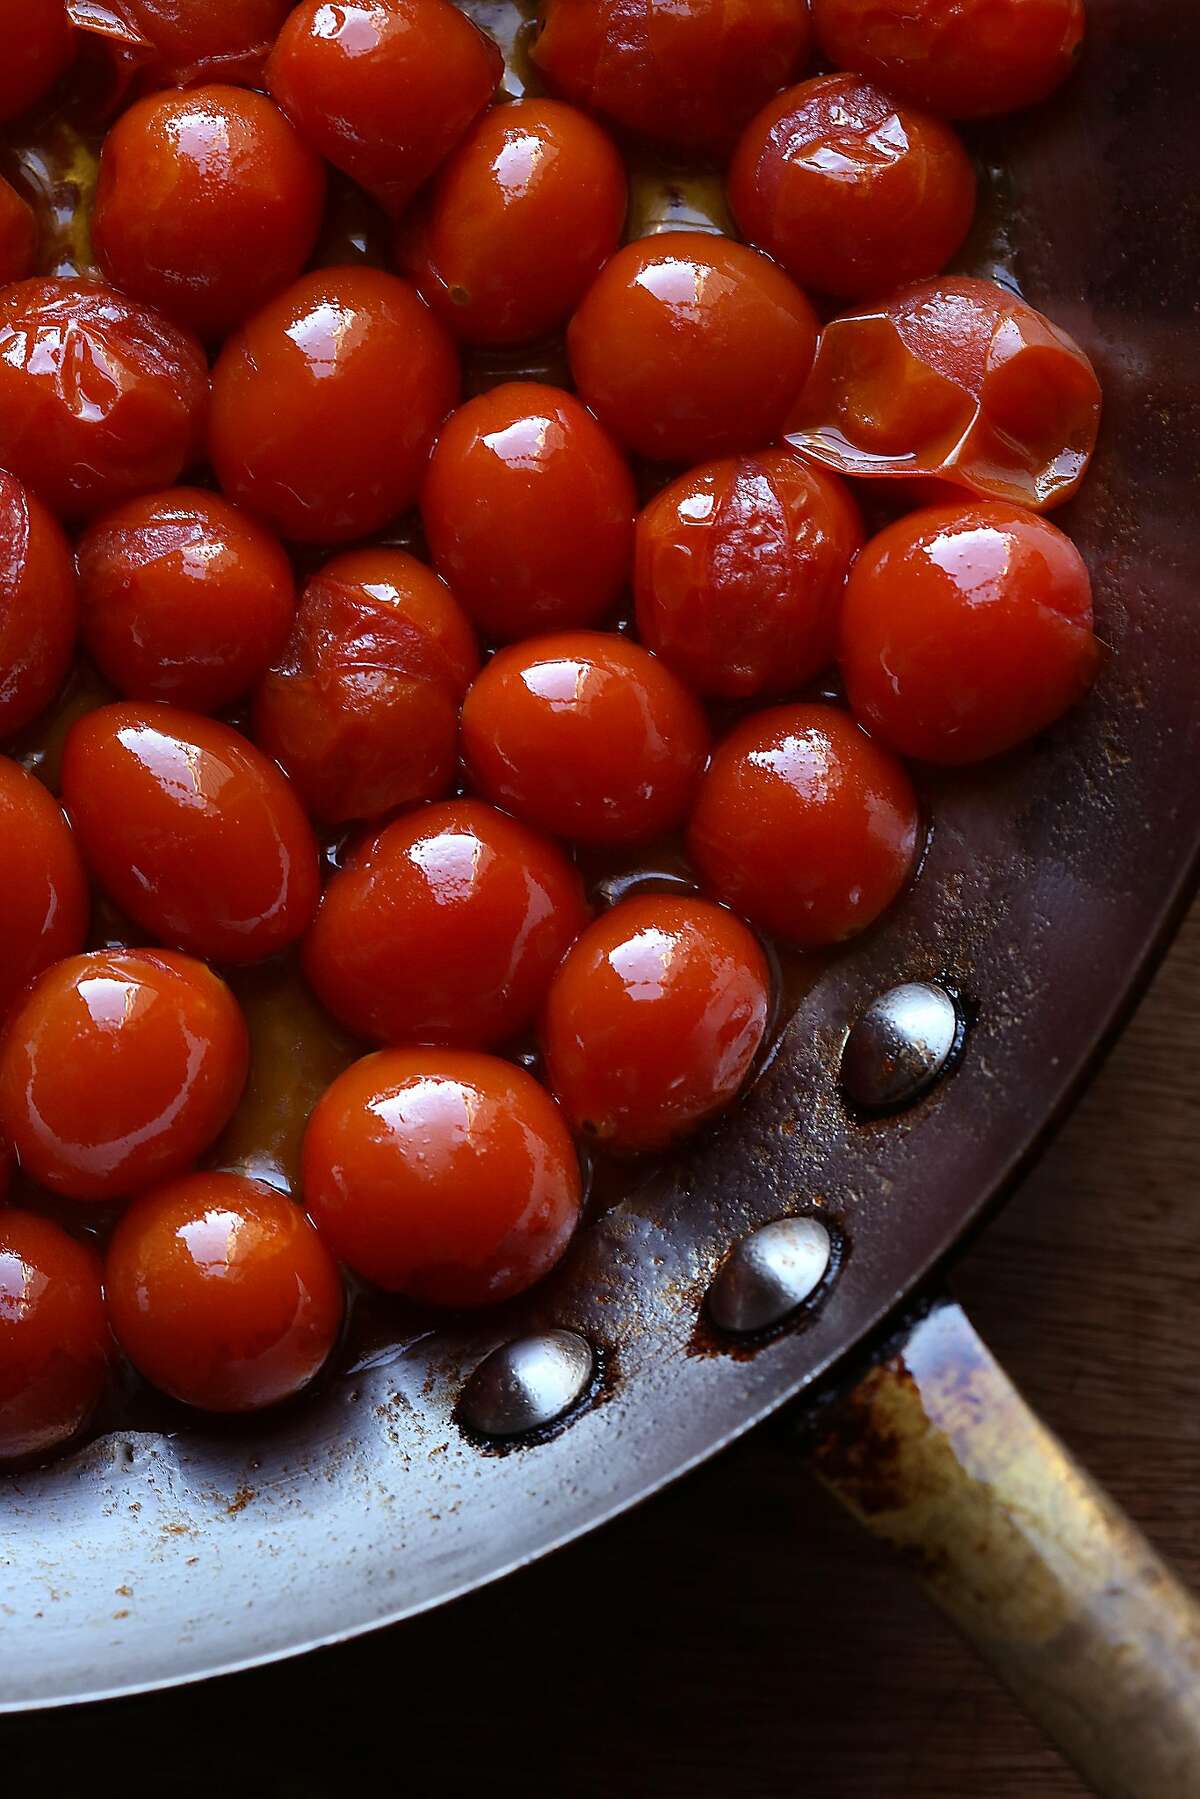 Popped tomatoes made by Molly Watson in San Francisco, California, on Friday, June 12, 2015.